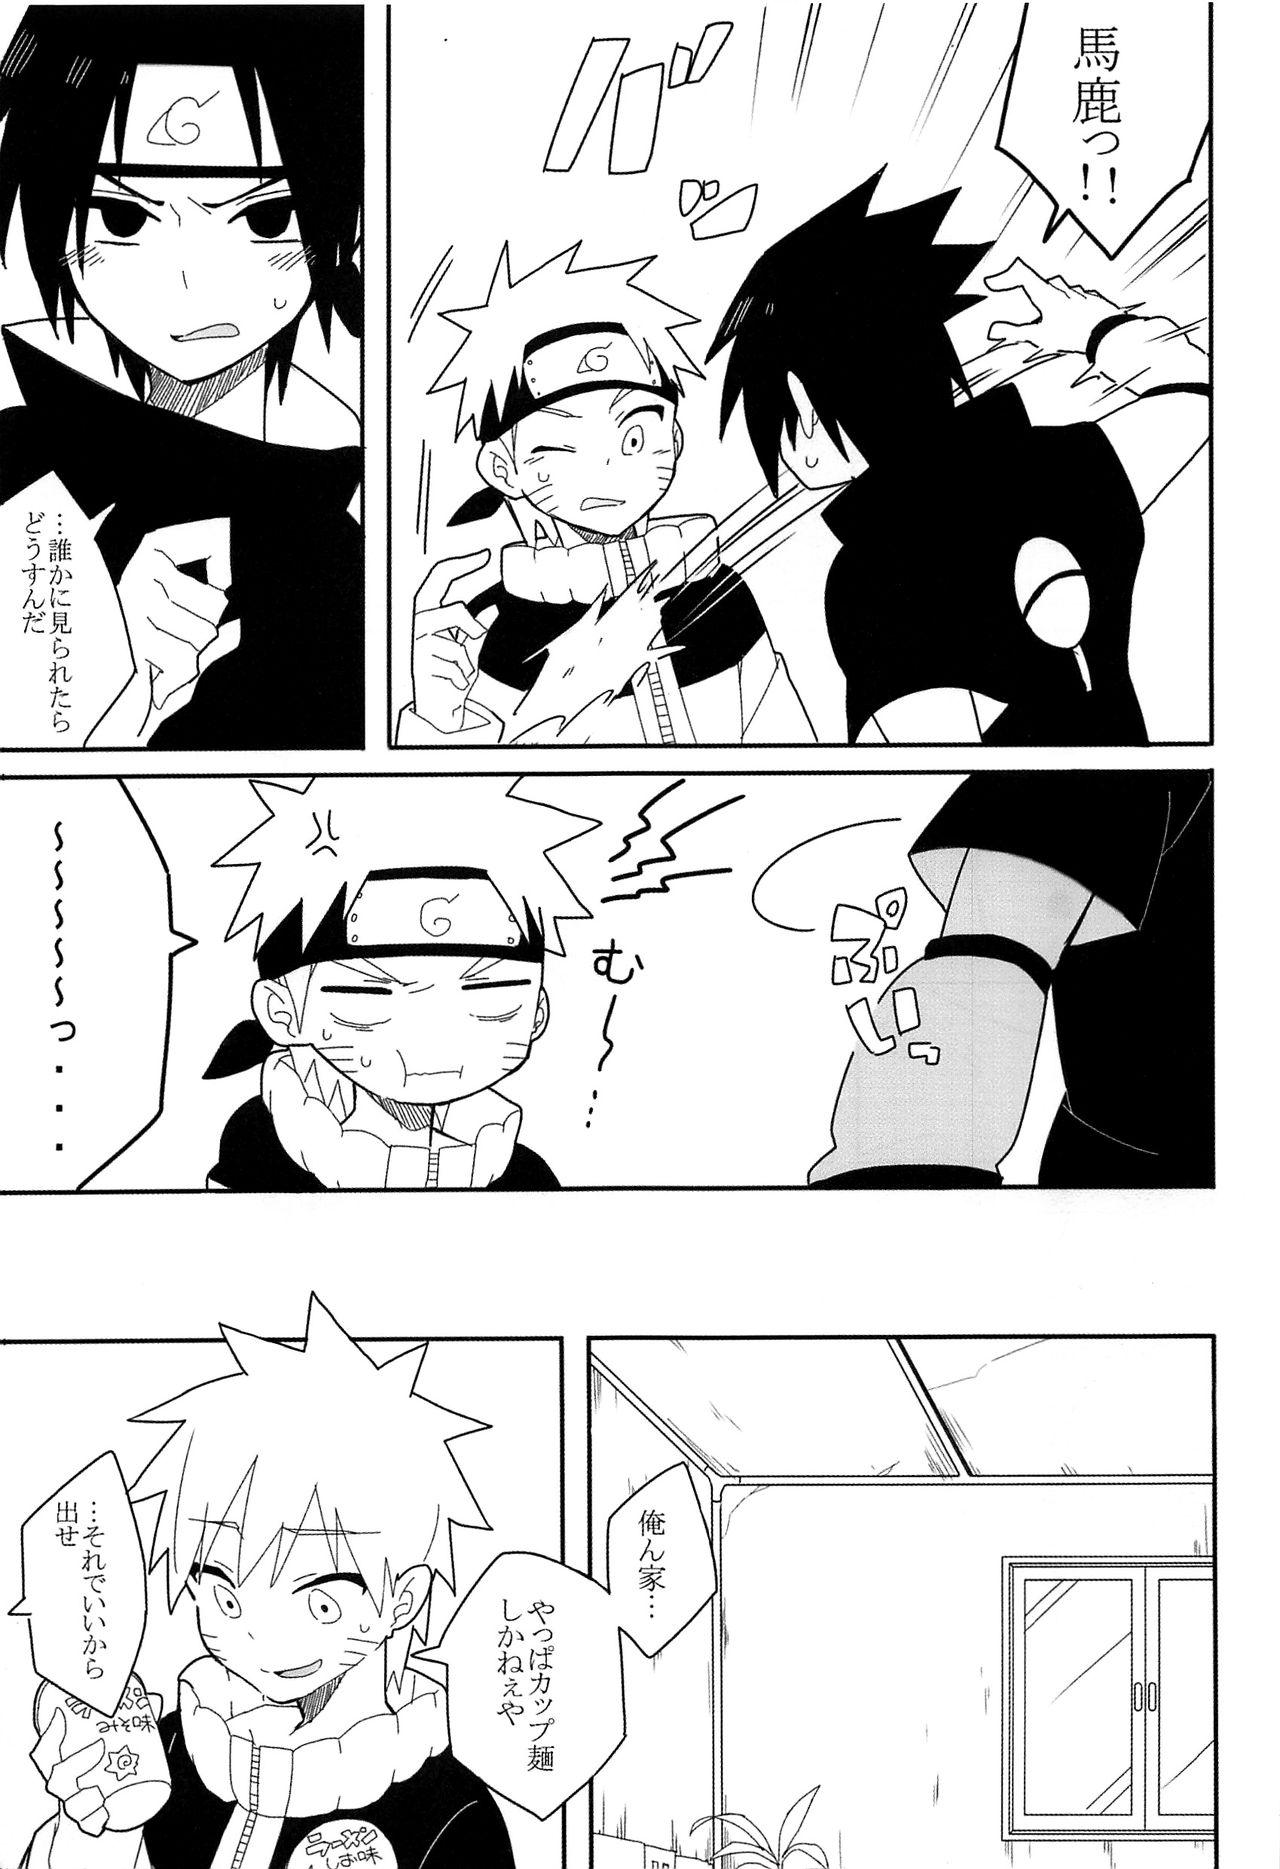 Huge Break through - Naruto Pussy Lick - Page 2